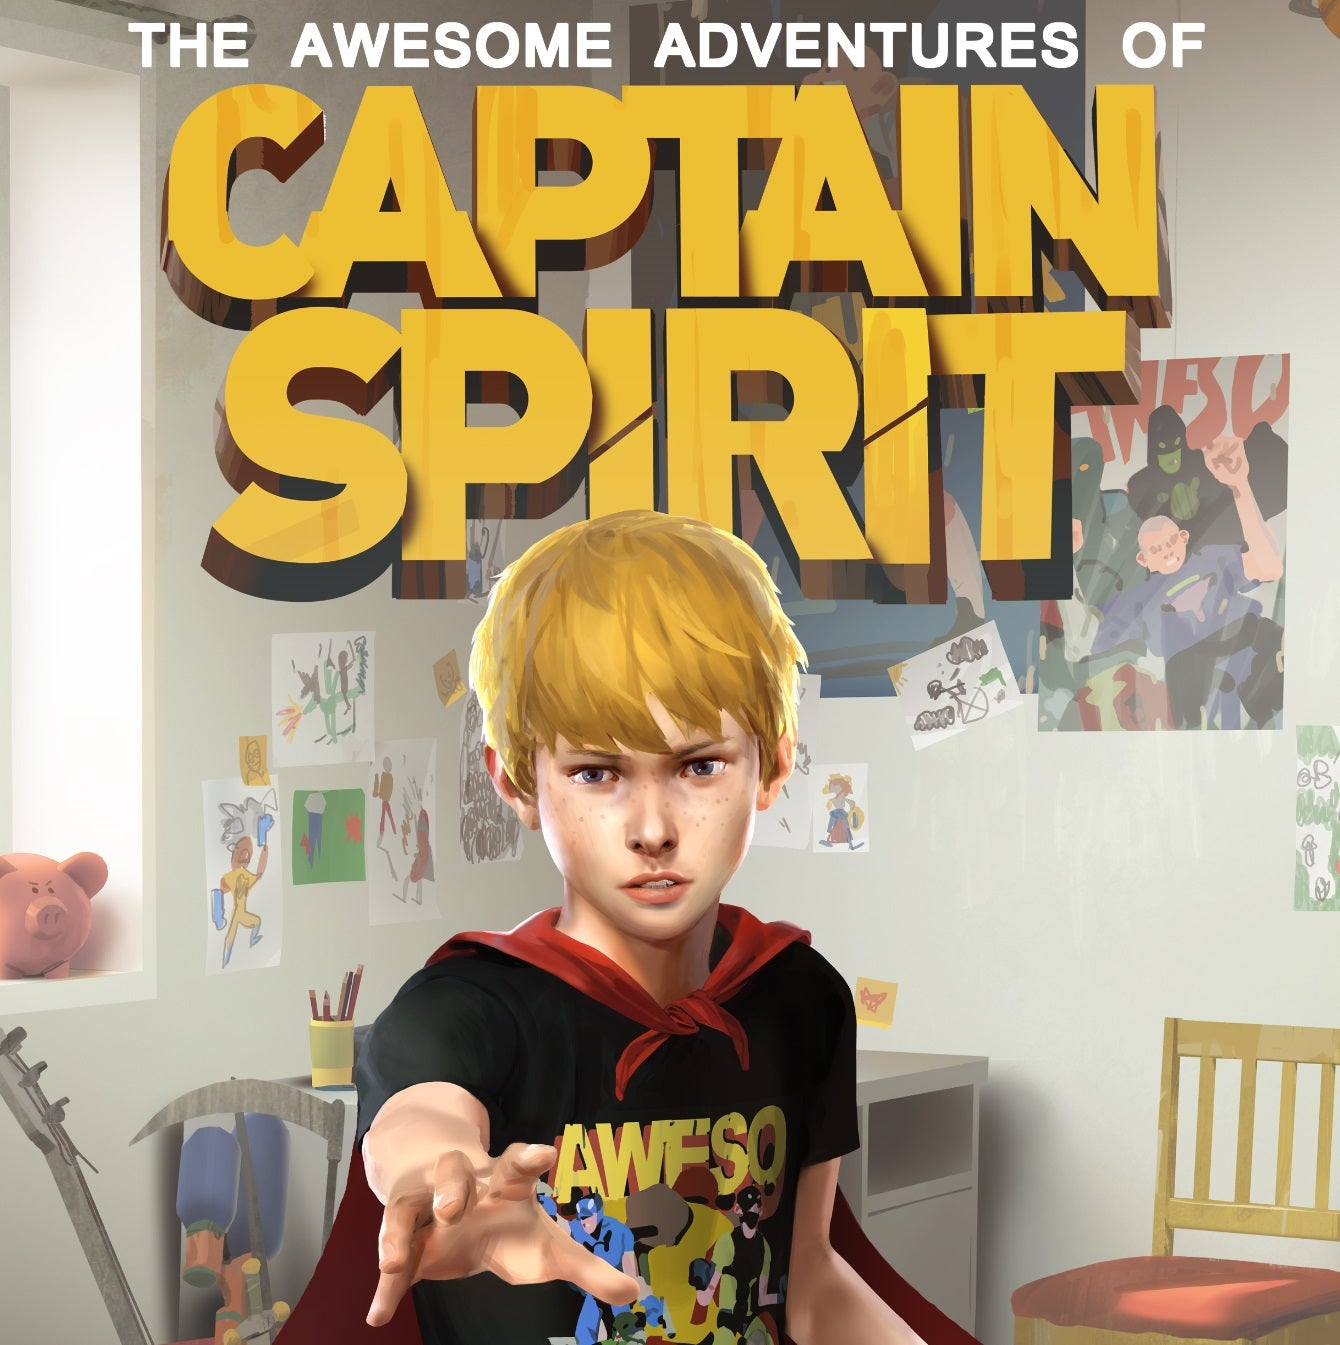 Image for E3 2018: The Awesome Adventures of Captain Spirit is a free game set in the Life is Strange universe